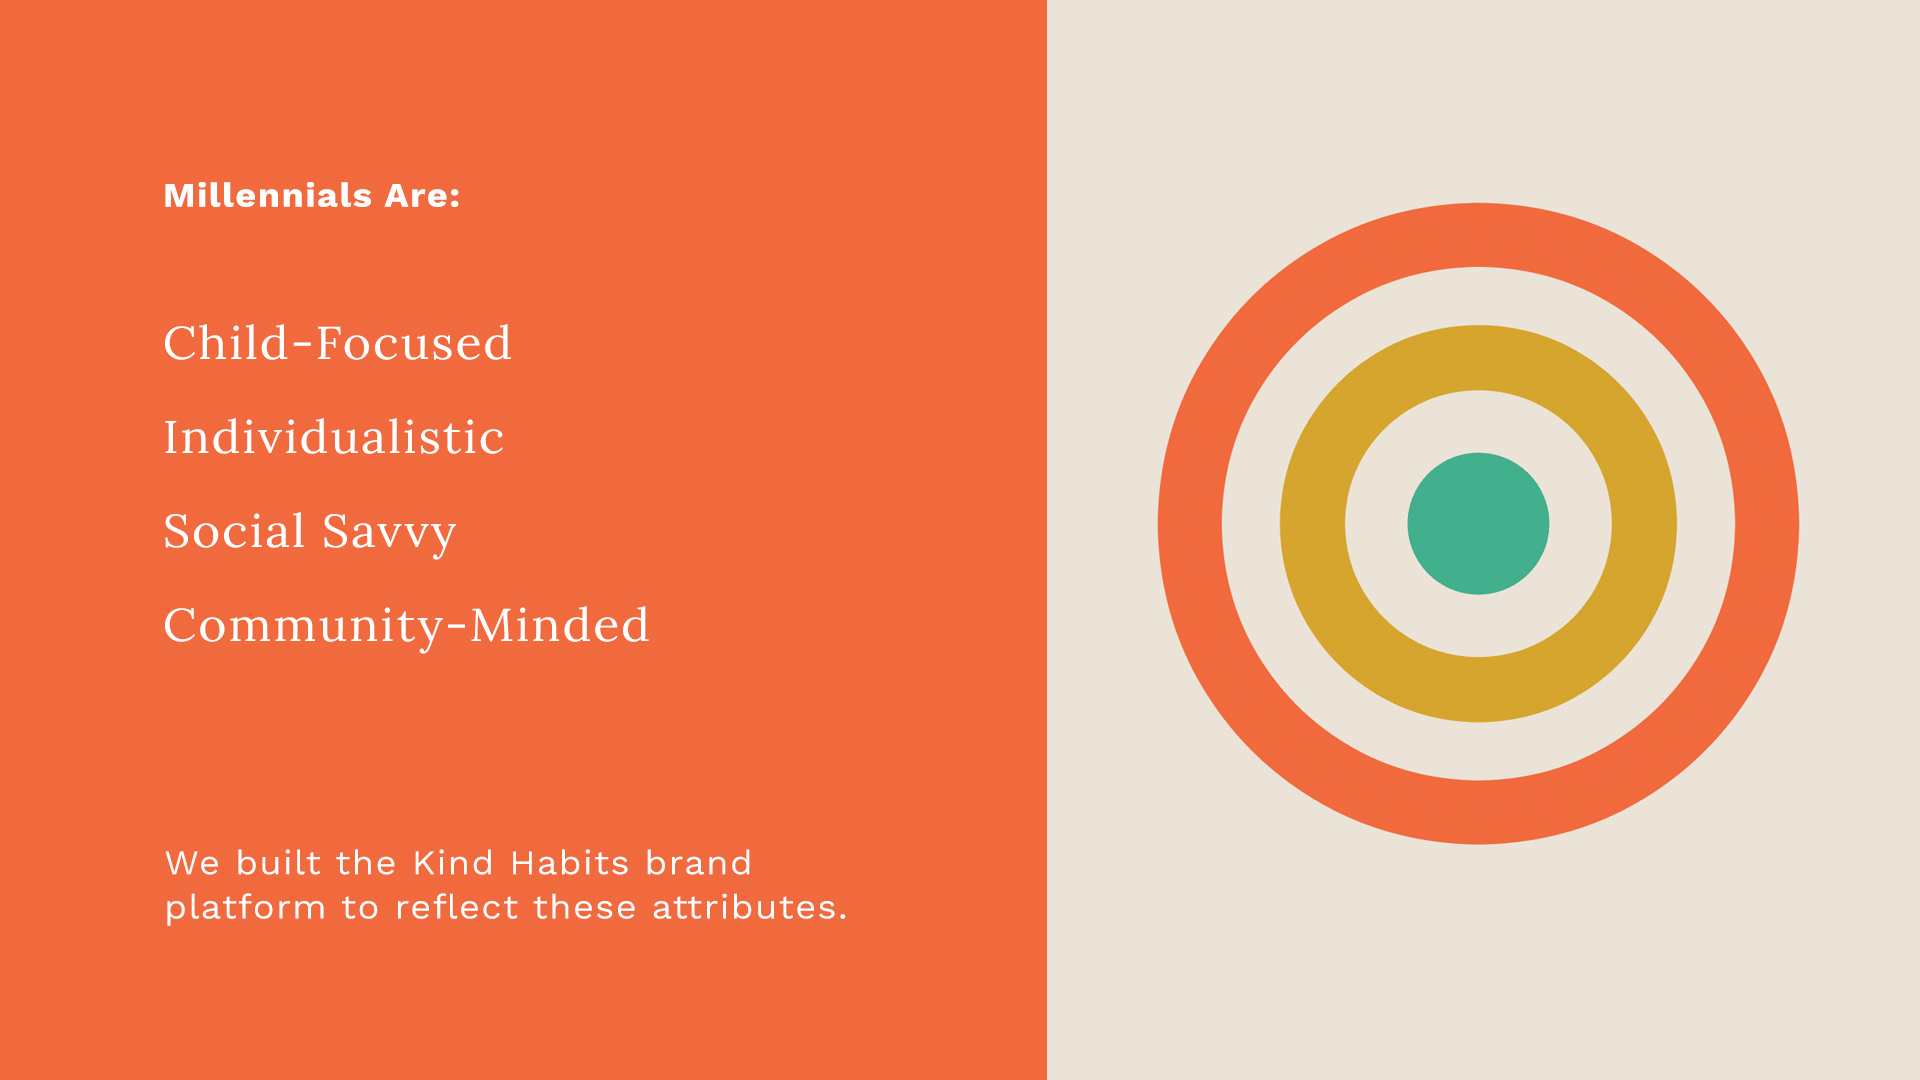 Kind Habits Branding: An image of a bullseye with brand platform attributes.